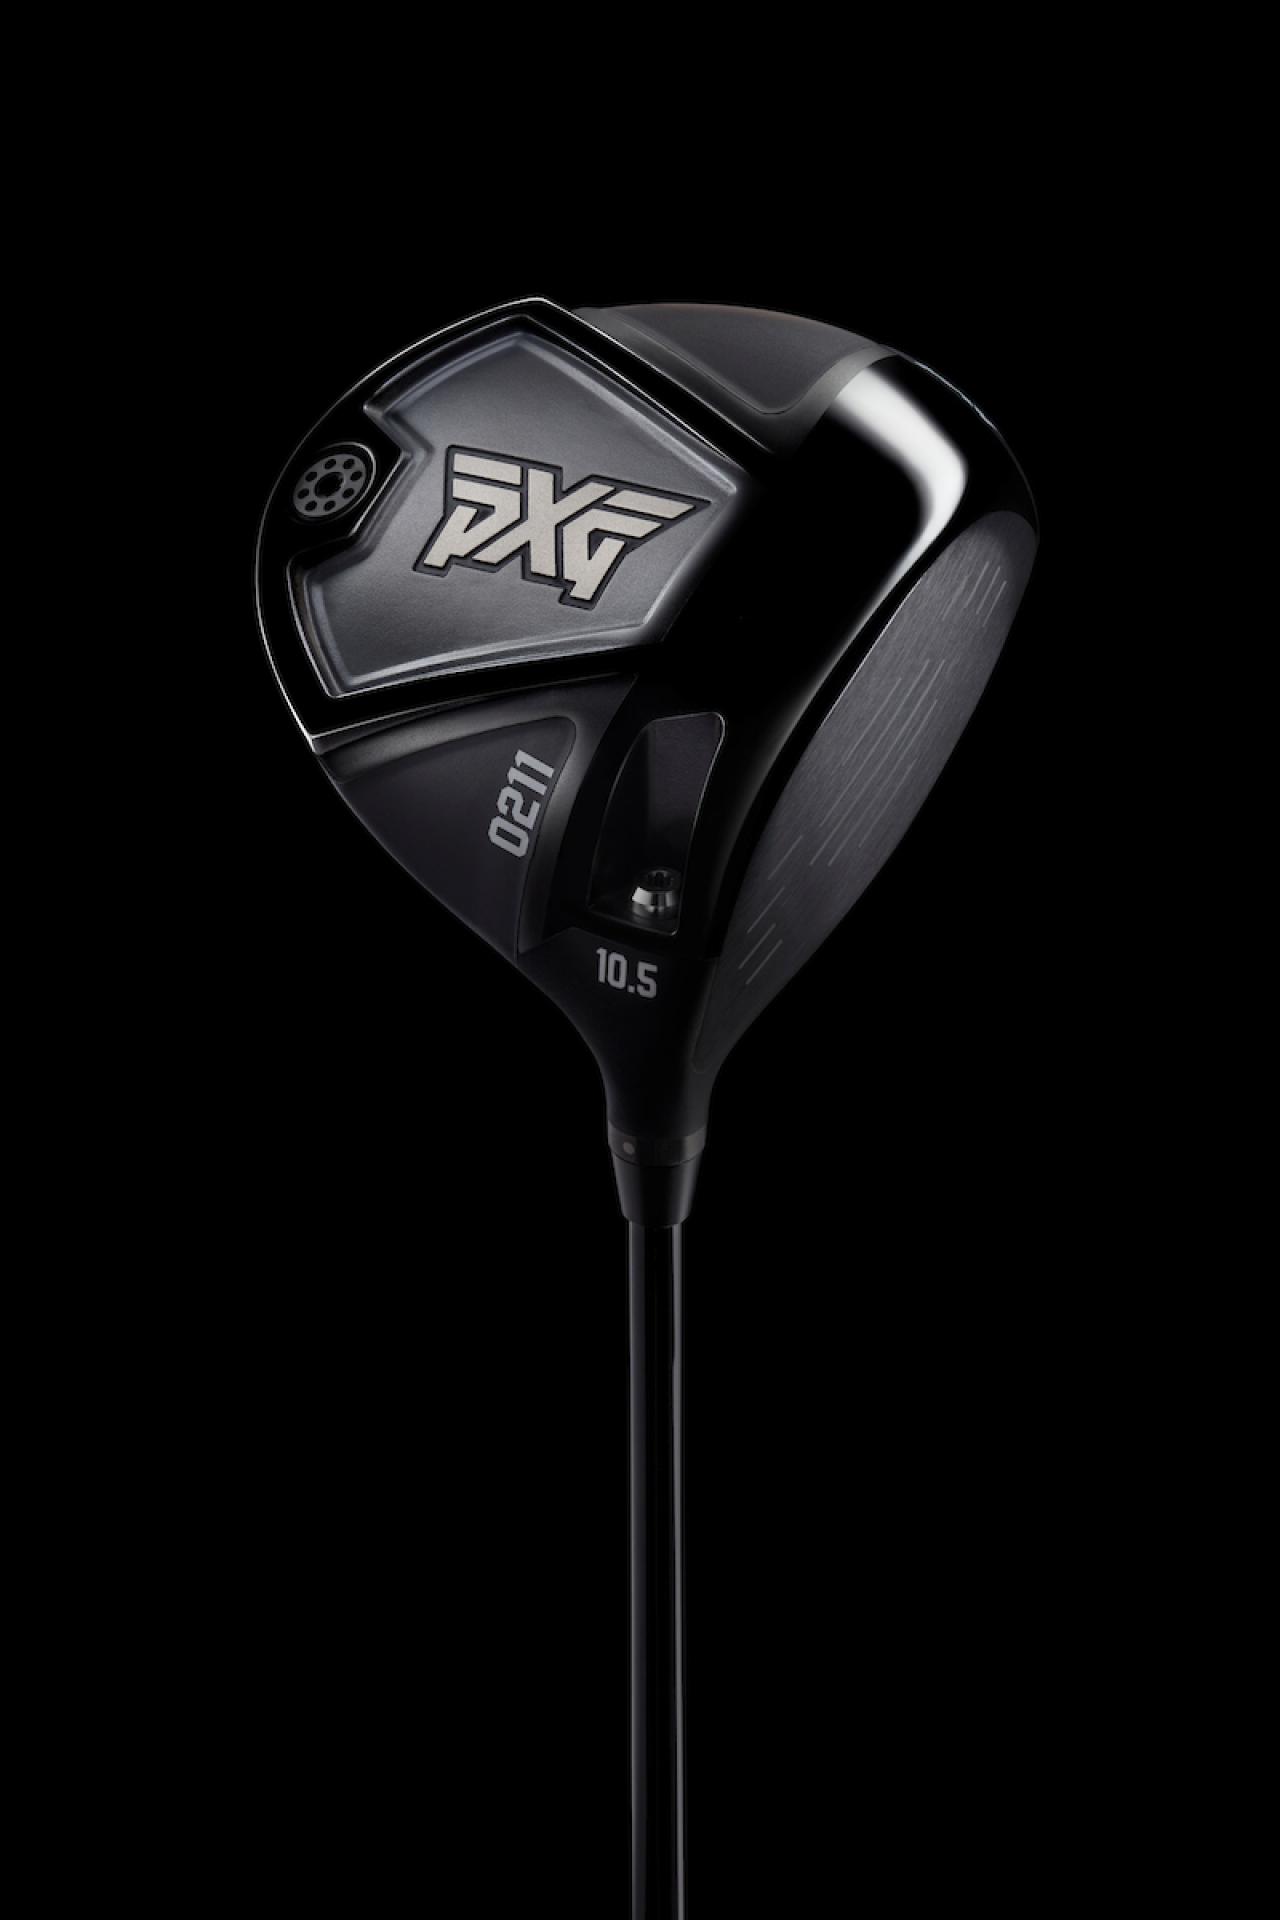 PXG 0211 metalwood lineup includes drivers at a price you won't 